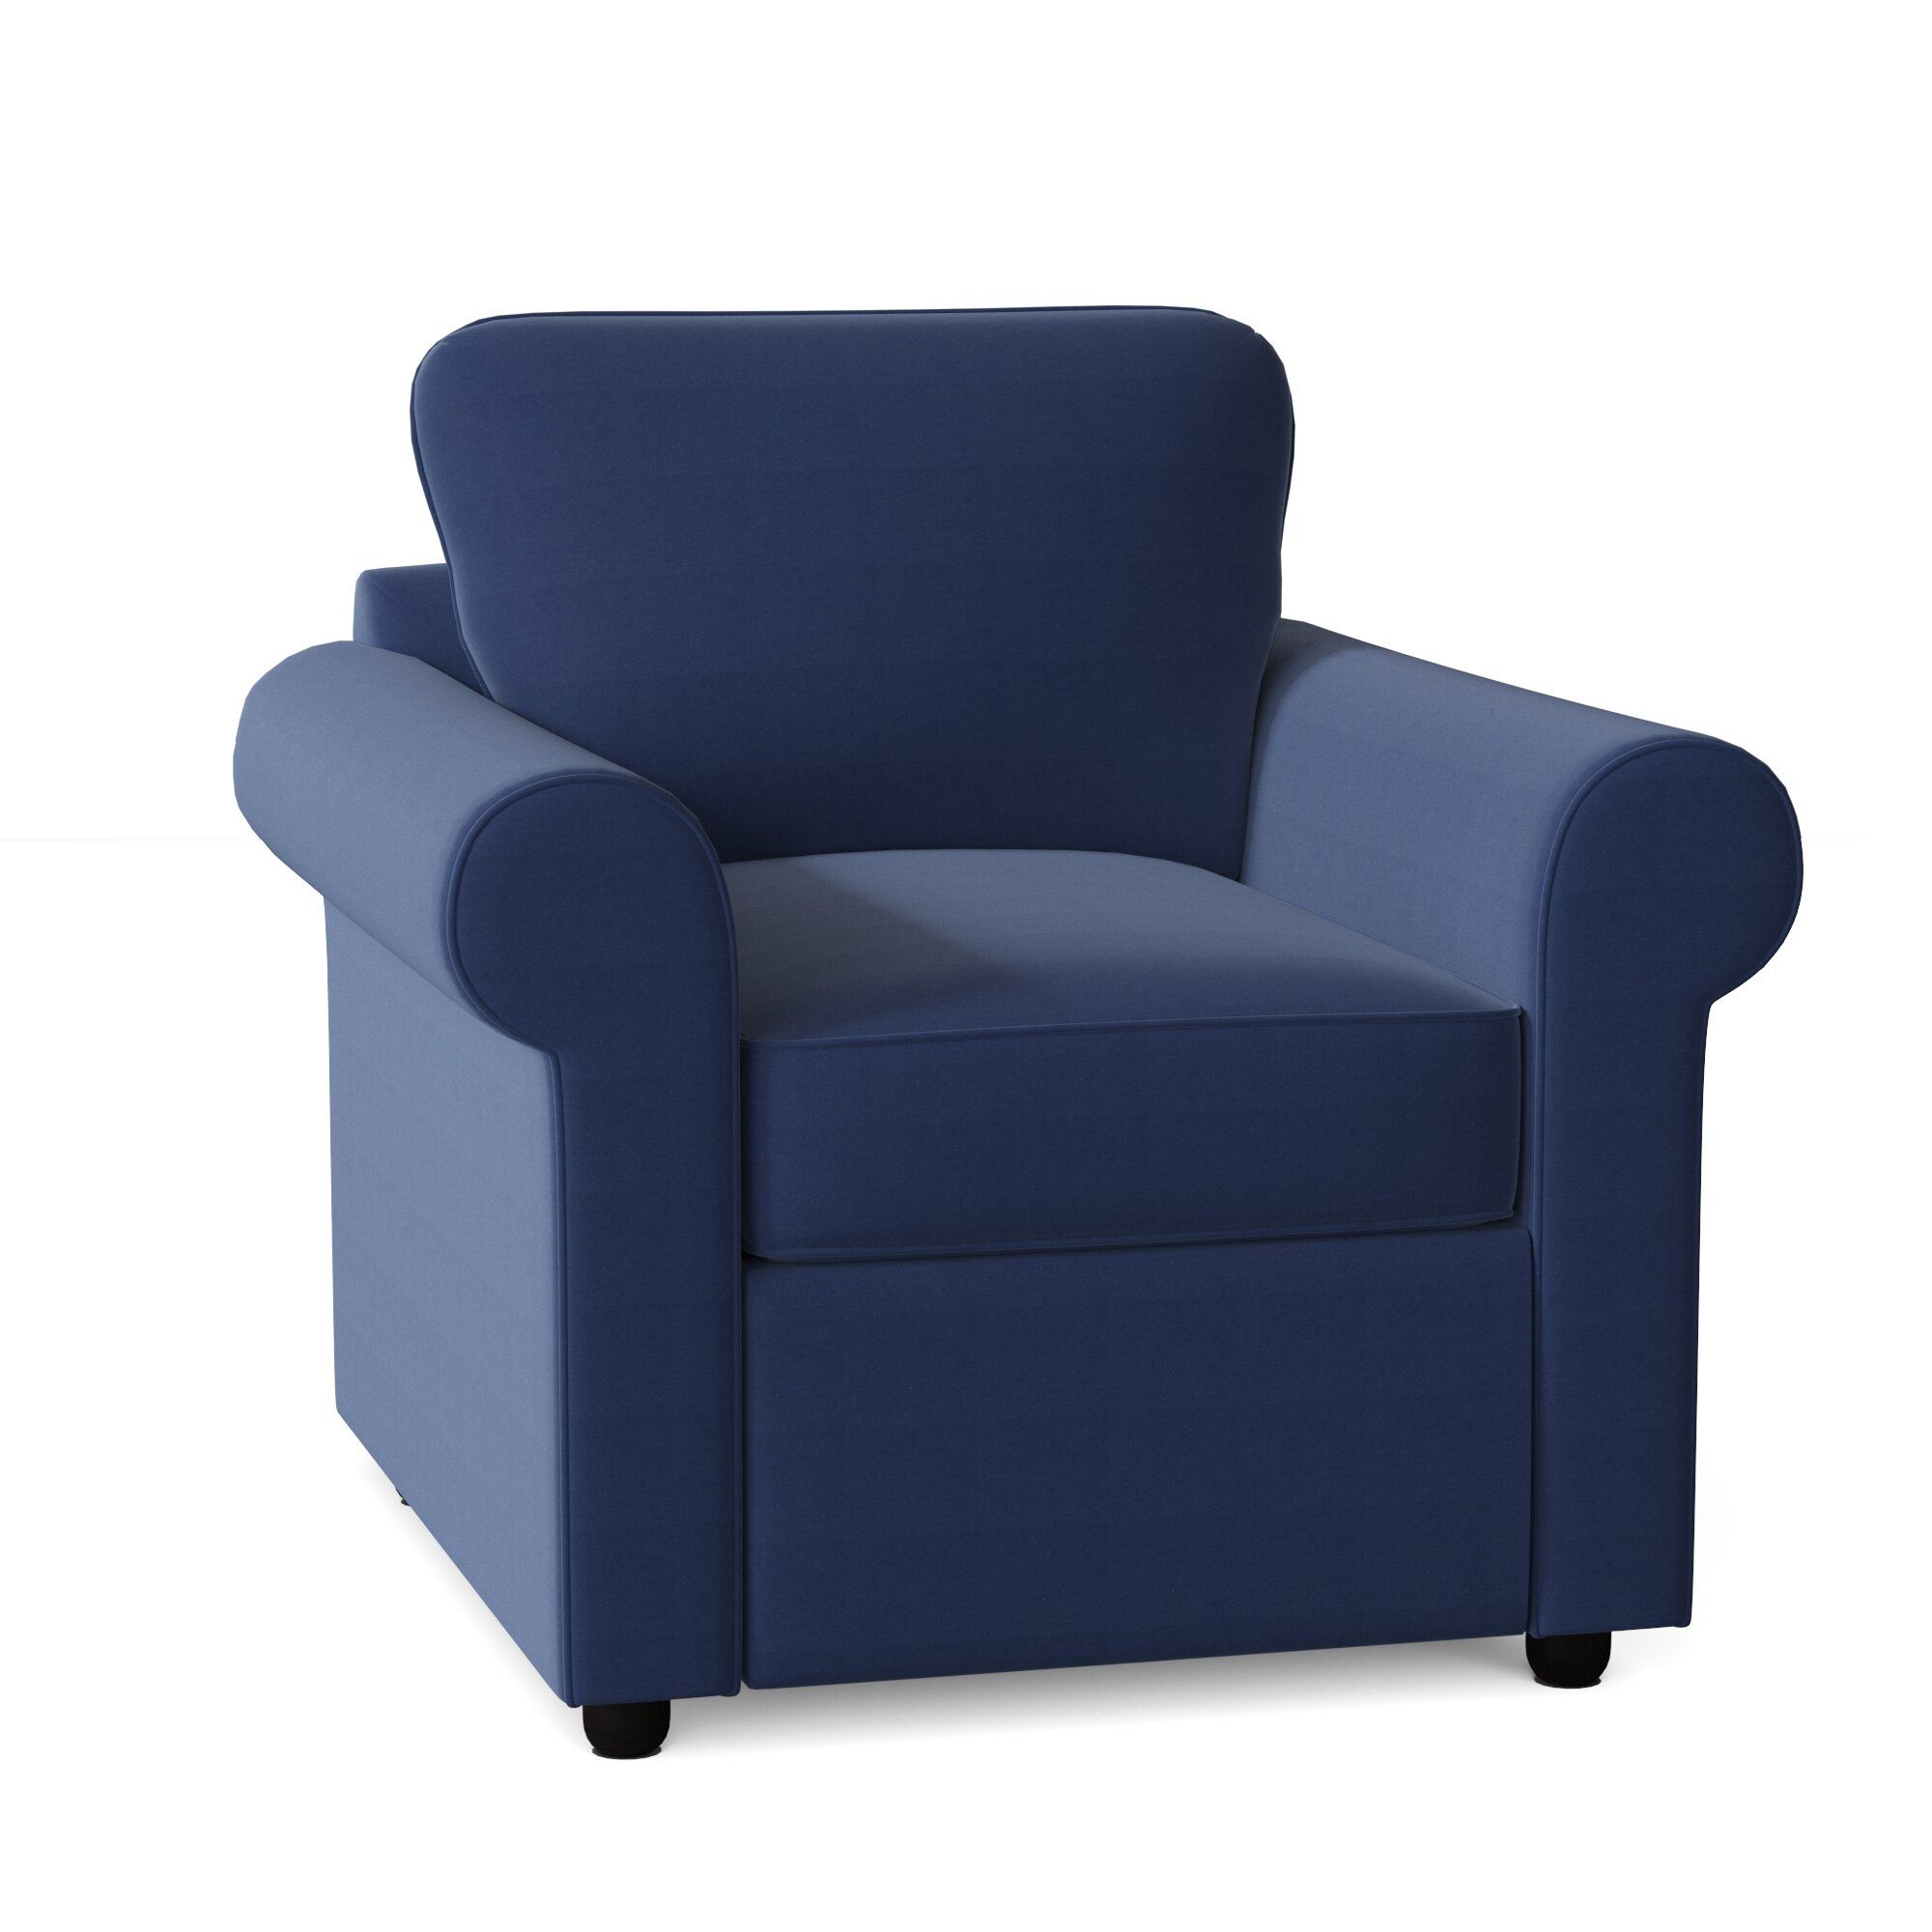 Alan Armchair Pertaining To Munson Linen Barrel Chairs (View 7 of 15)